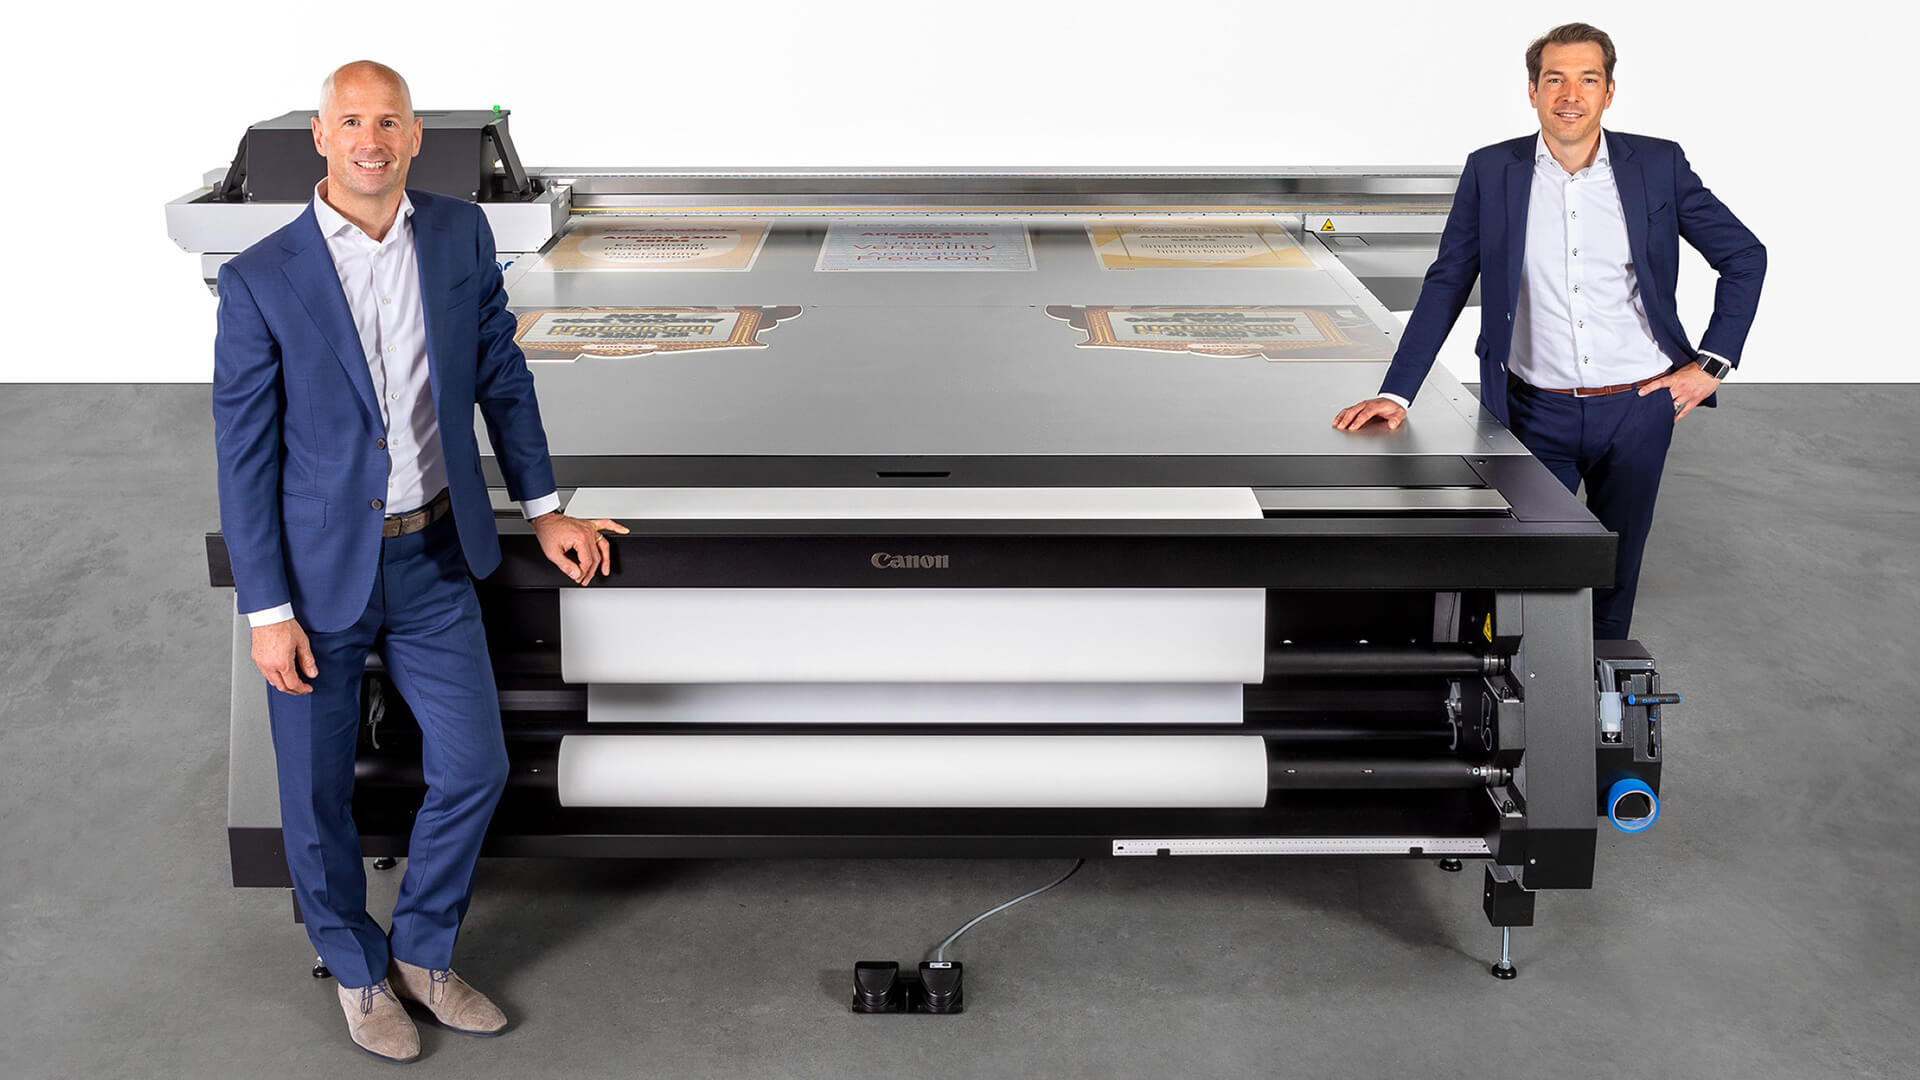 Dirk Brouns, Vice President, Large Format Graphics and Martijn van Hoorn, Senior Vice President Research & Development at Canon Production Printing